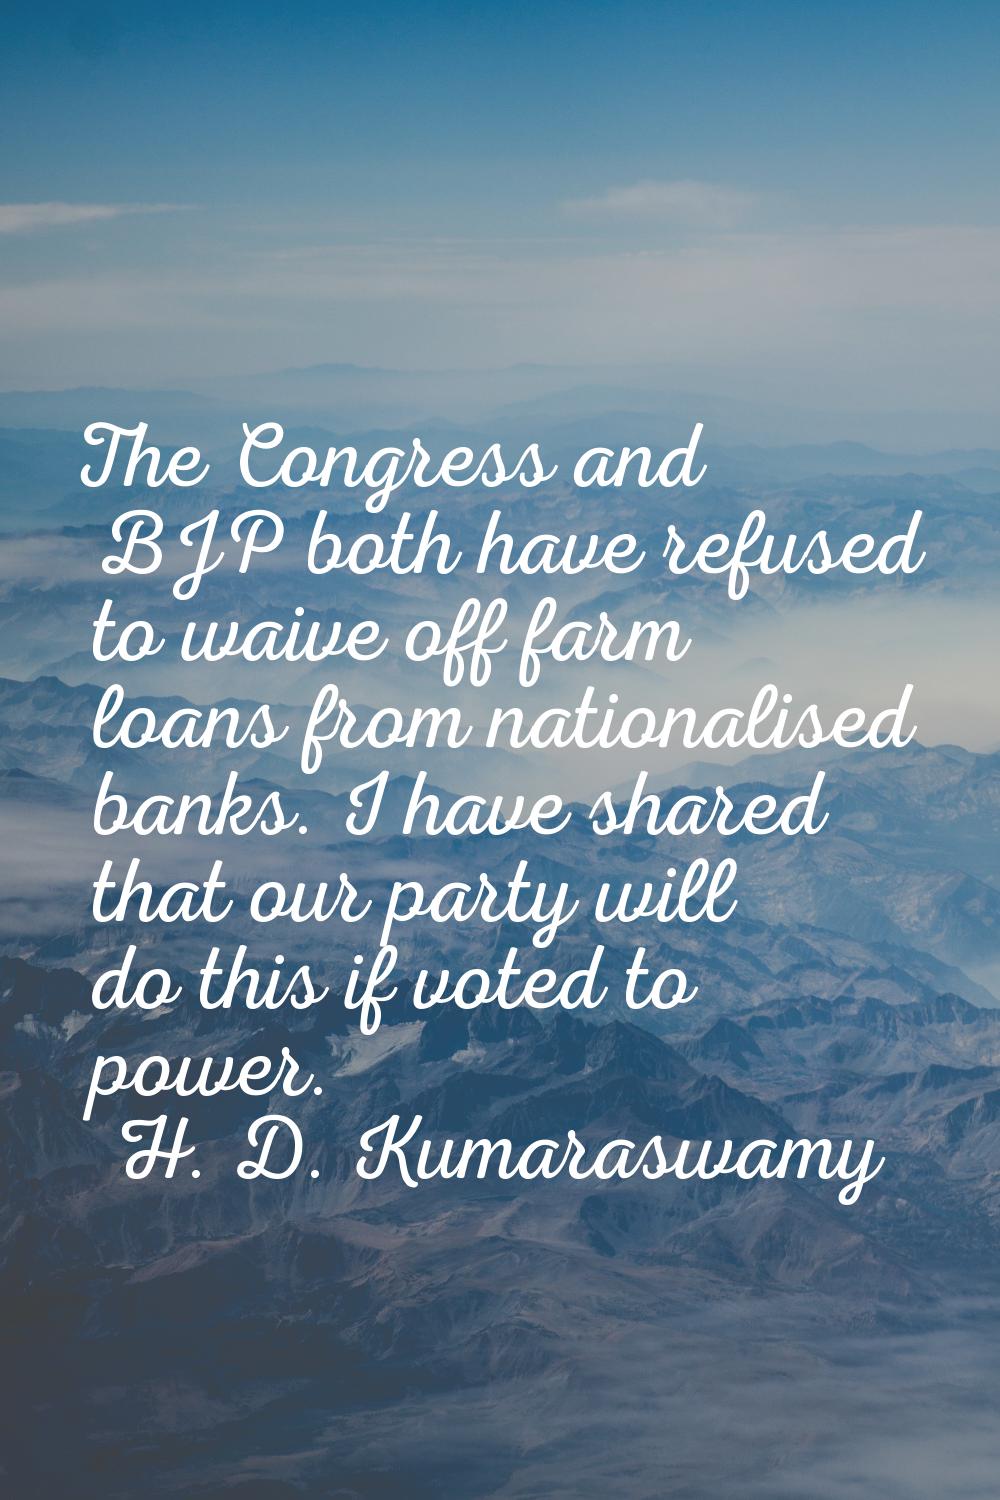 The Congress and BJP both have refused to waive off farm loans from nationalised banks. I have shar